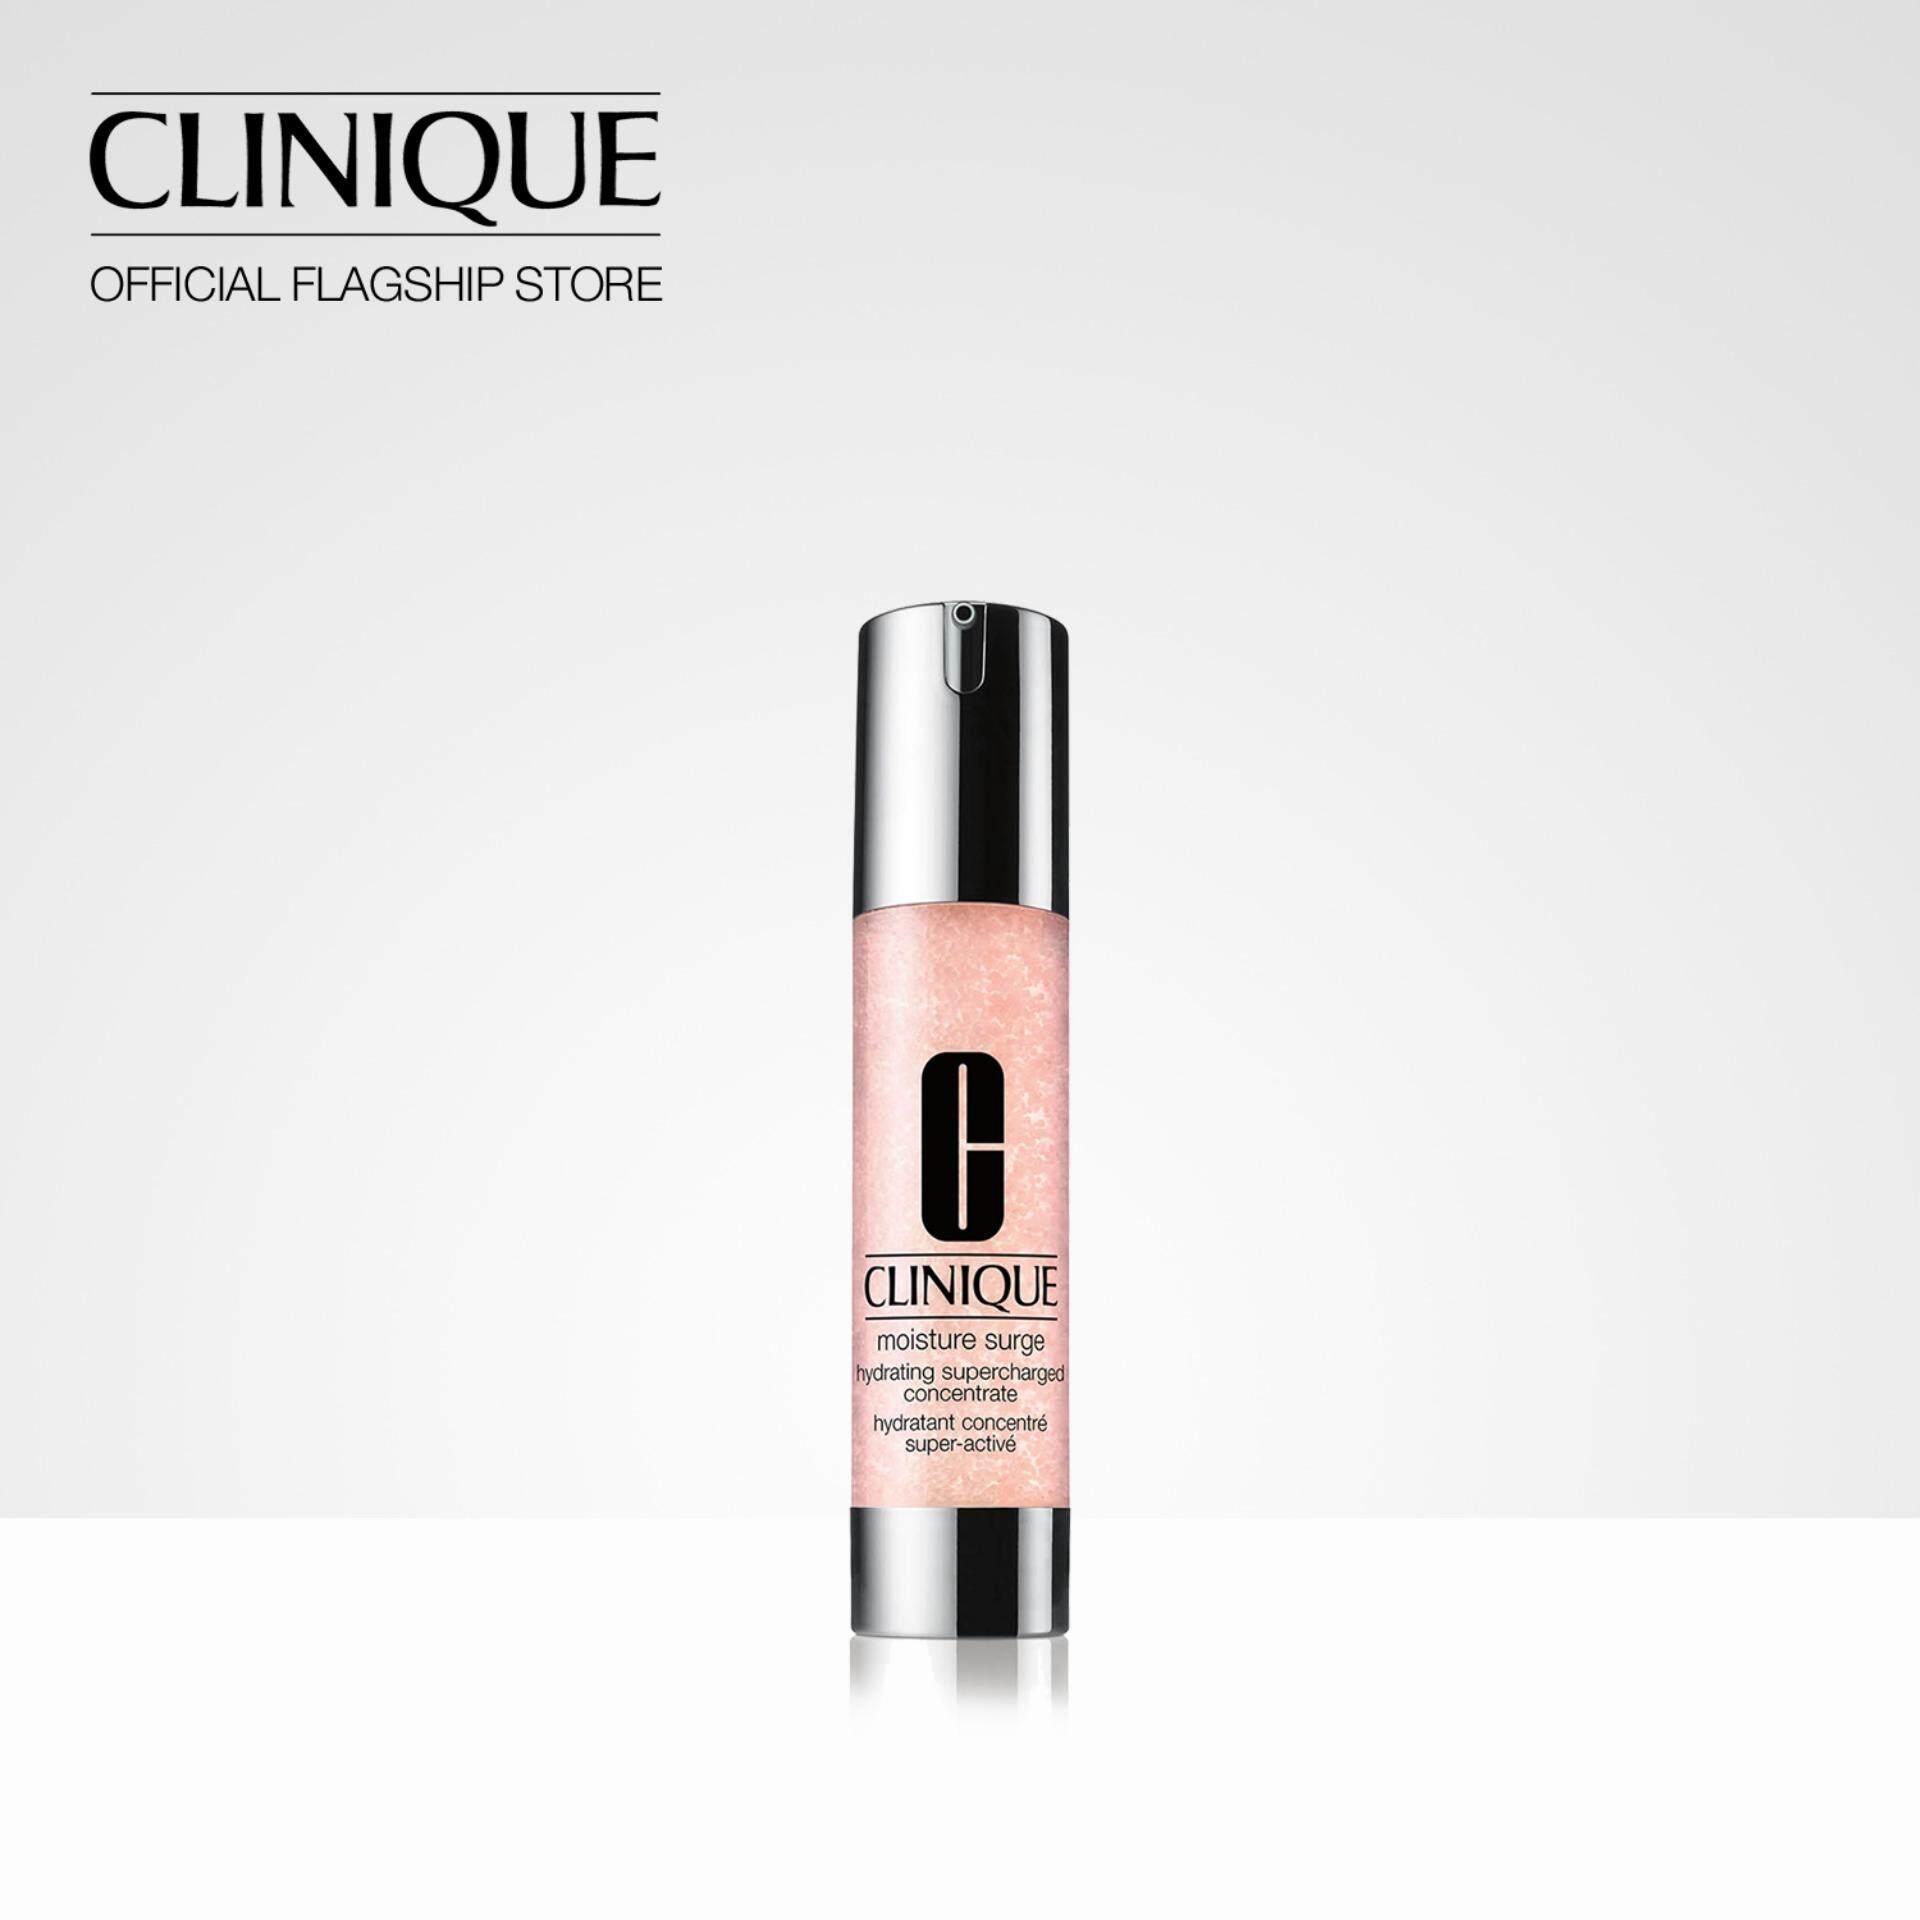 Clinique Moisture Surge Hydrating Supercharged Concentrate 48ml - Moisturizer